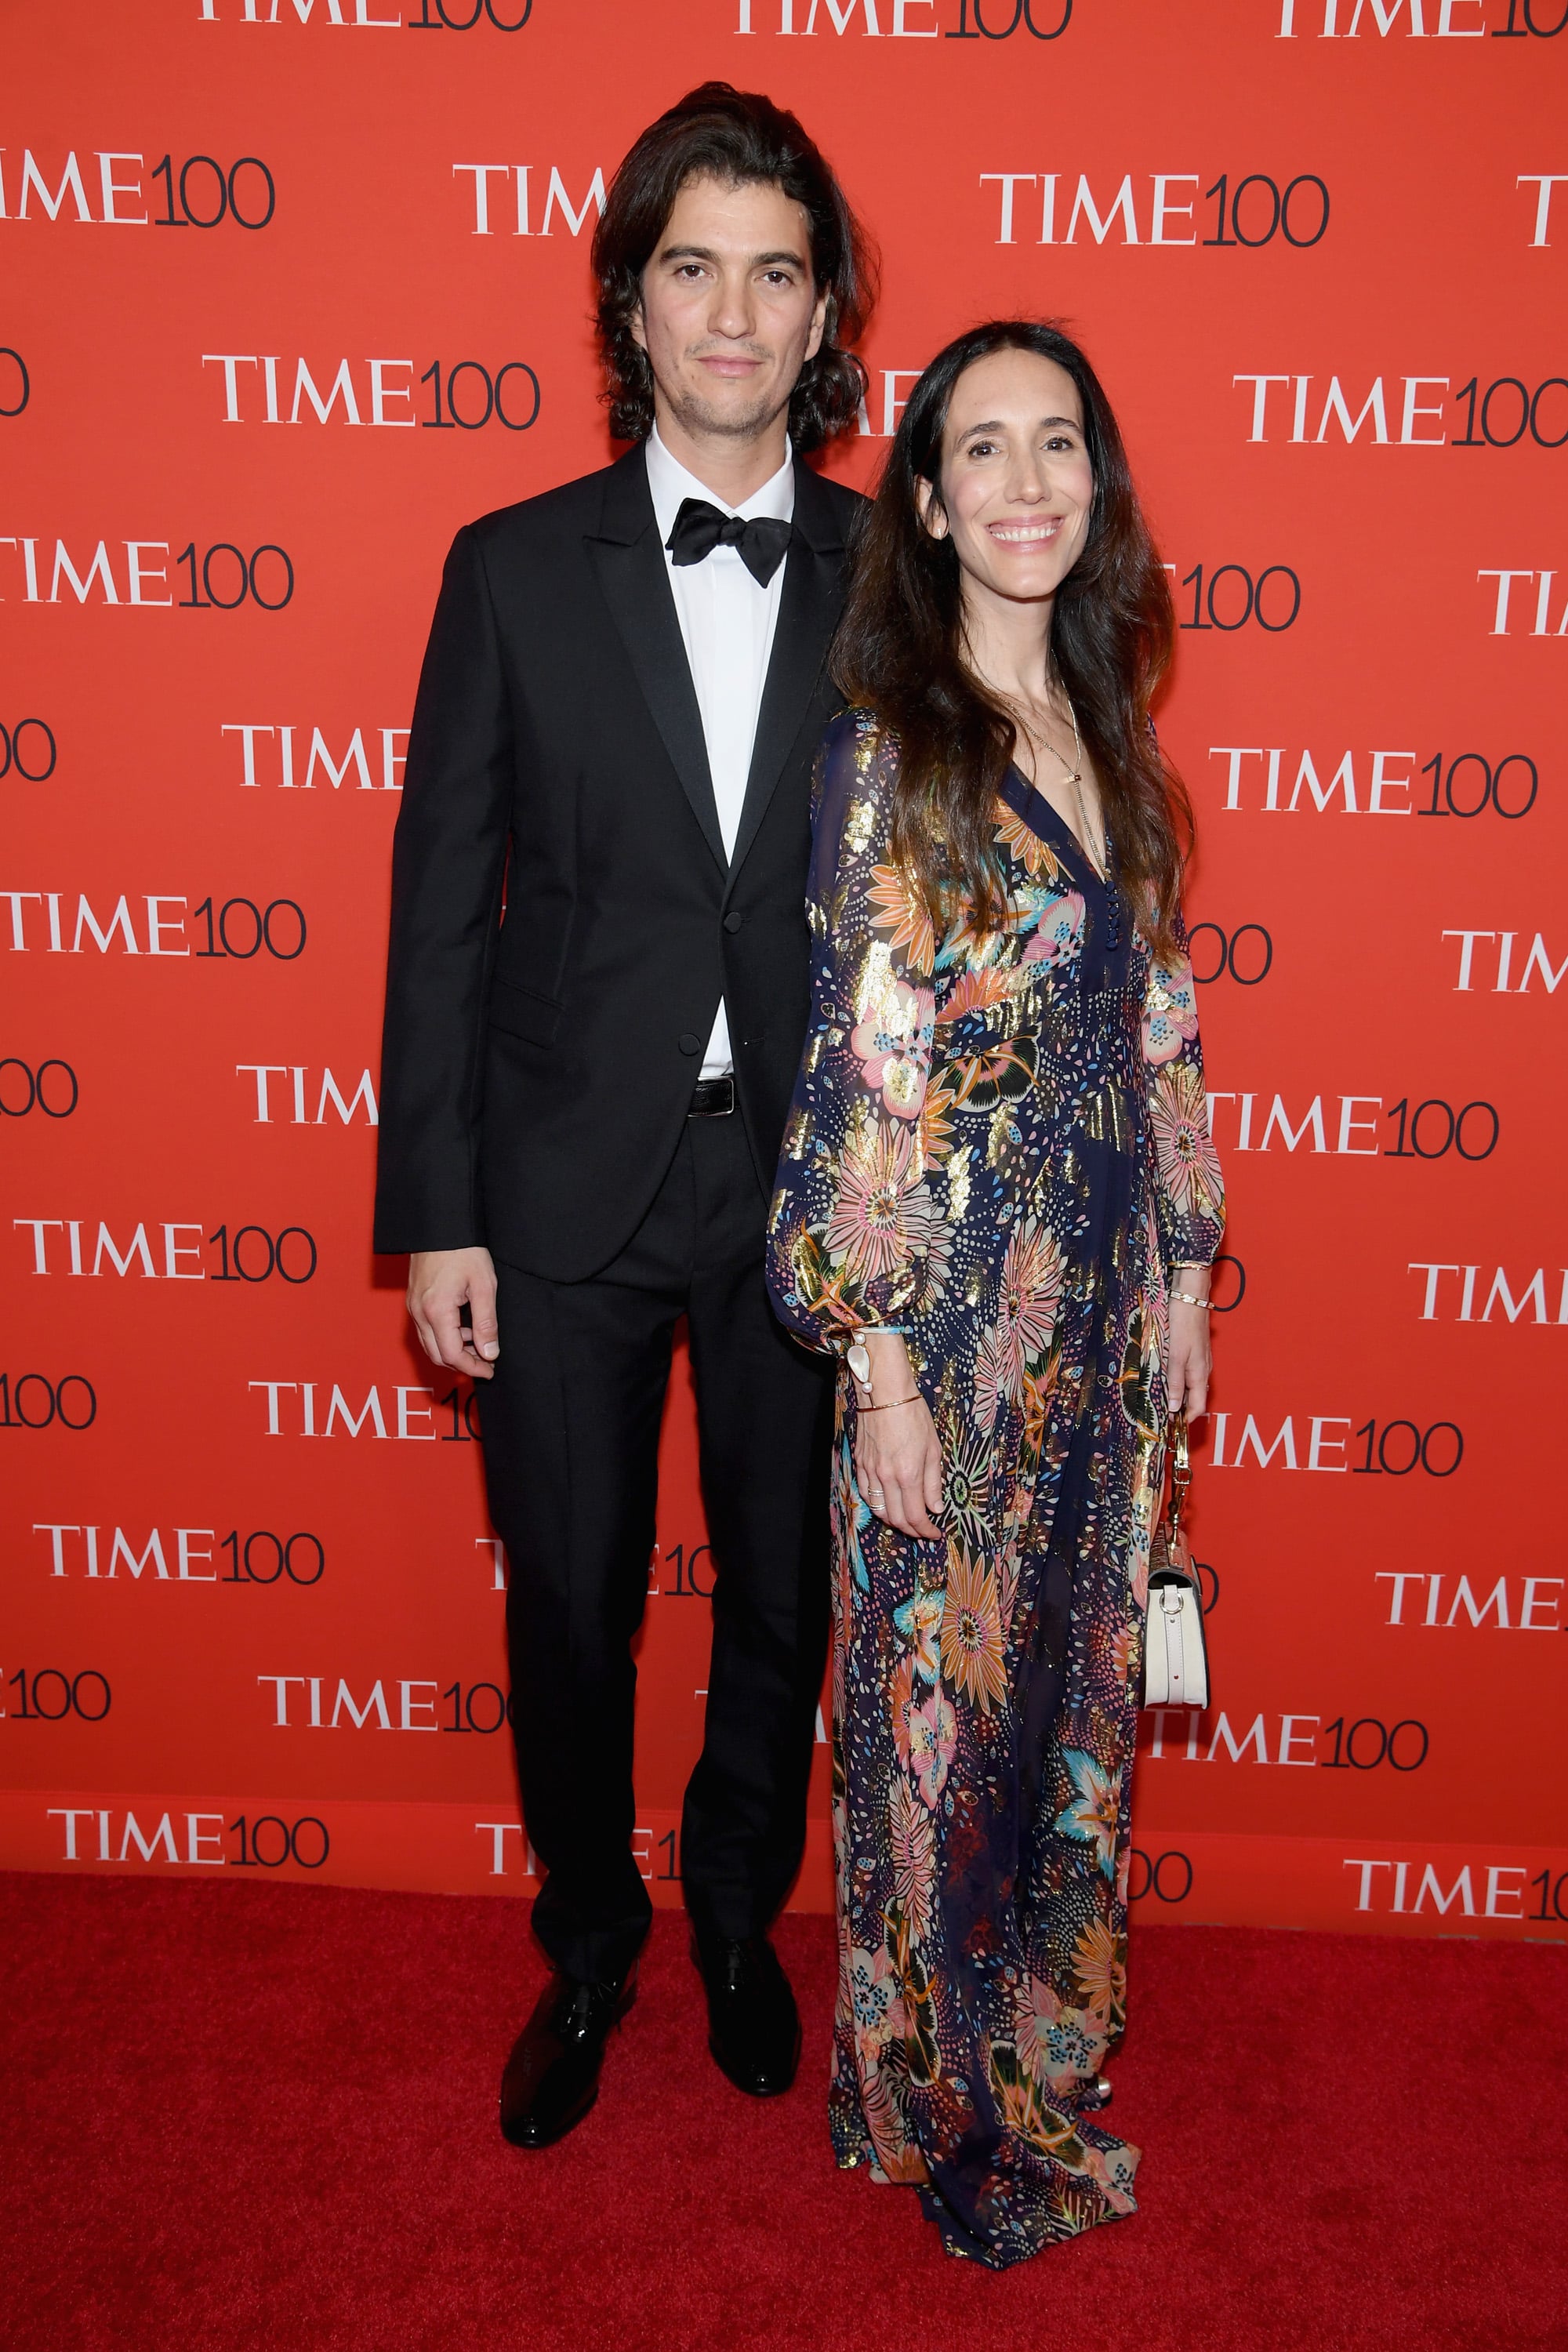 NEW YORK, NY - APRIL 24:  WeWork Co-Founder and CEO Adam Neumann and Rebekah Paltrow Neumann attend the 2018 Time 100 Gala at Jazz at Lincoln Centre on April 24, 2018 in New York City.  (Photo by Dimitrios Kambouris/Getty Images for Time)